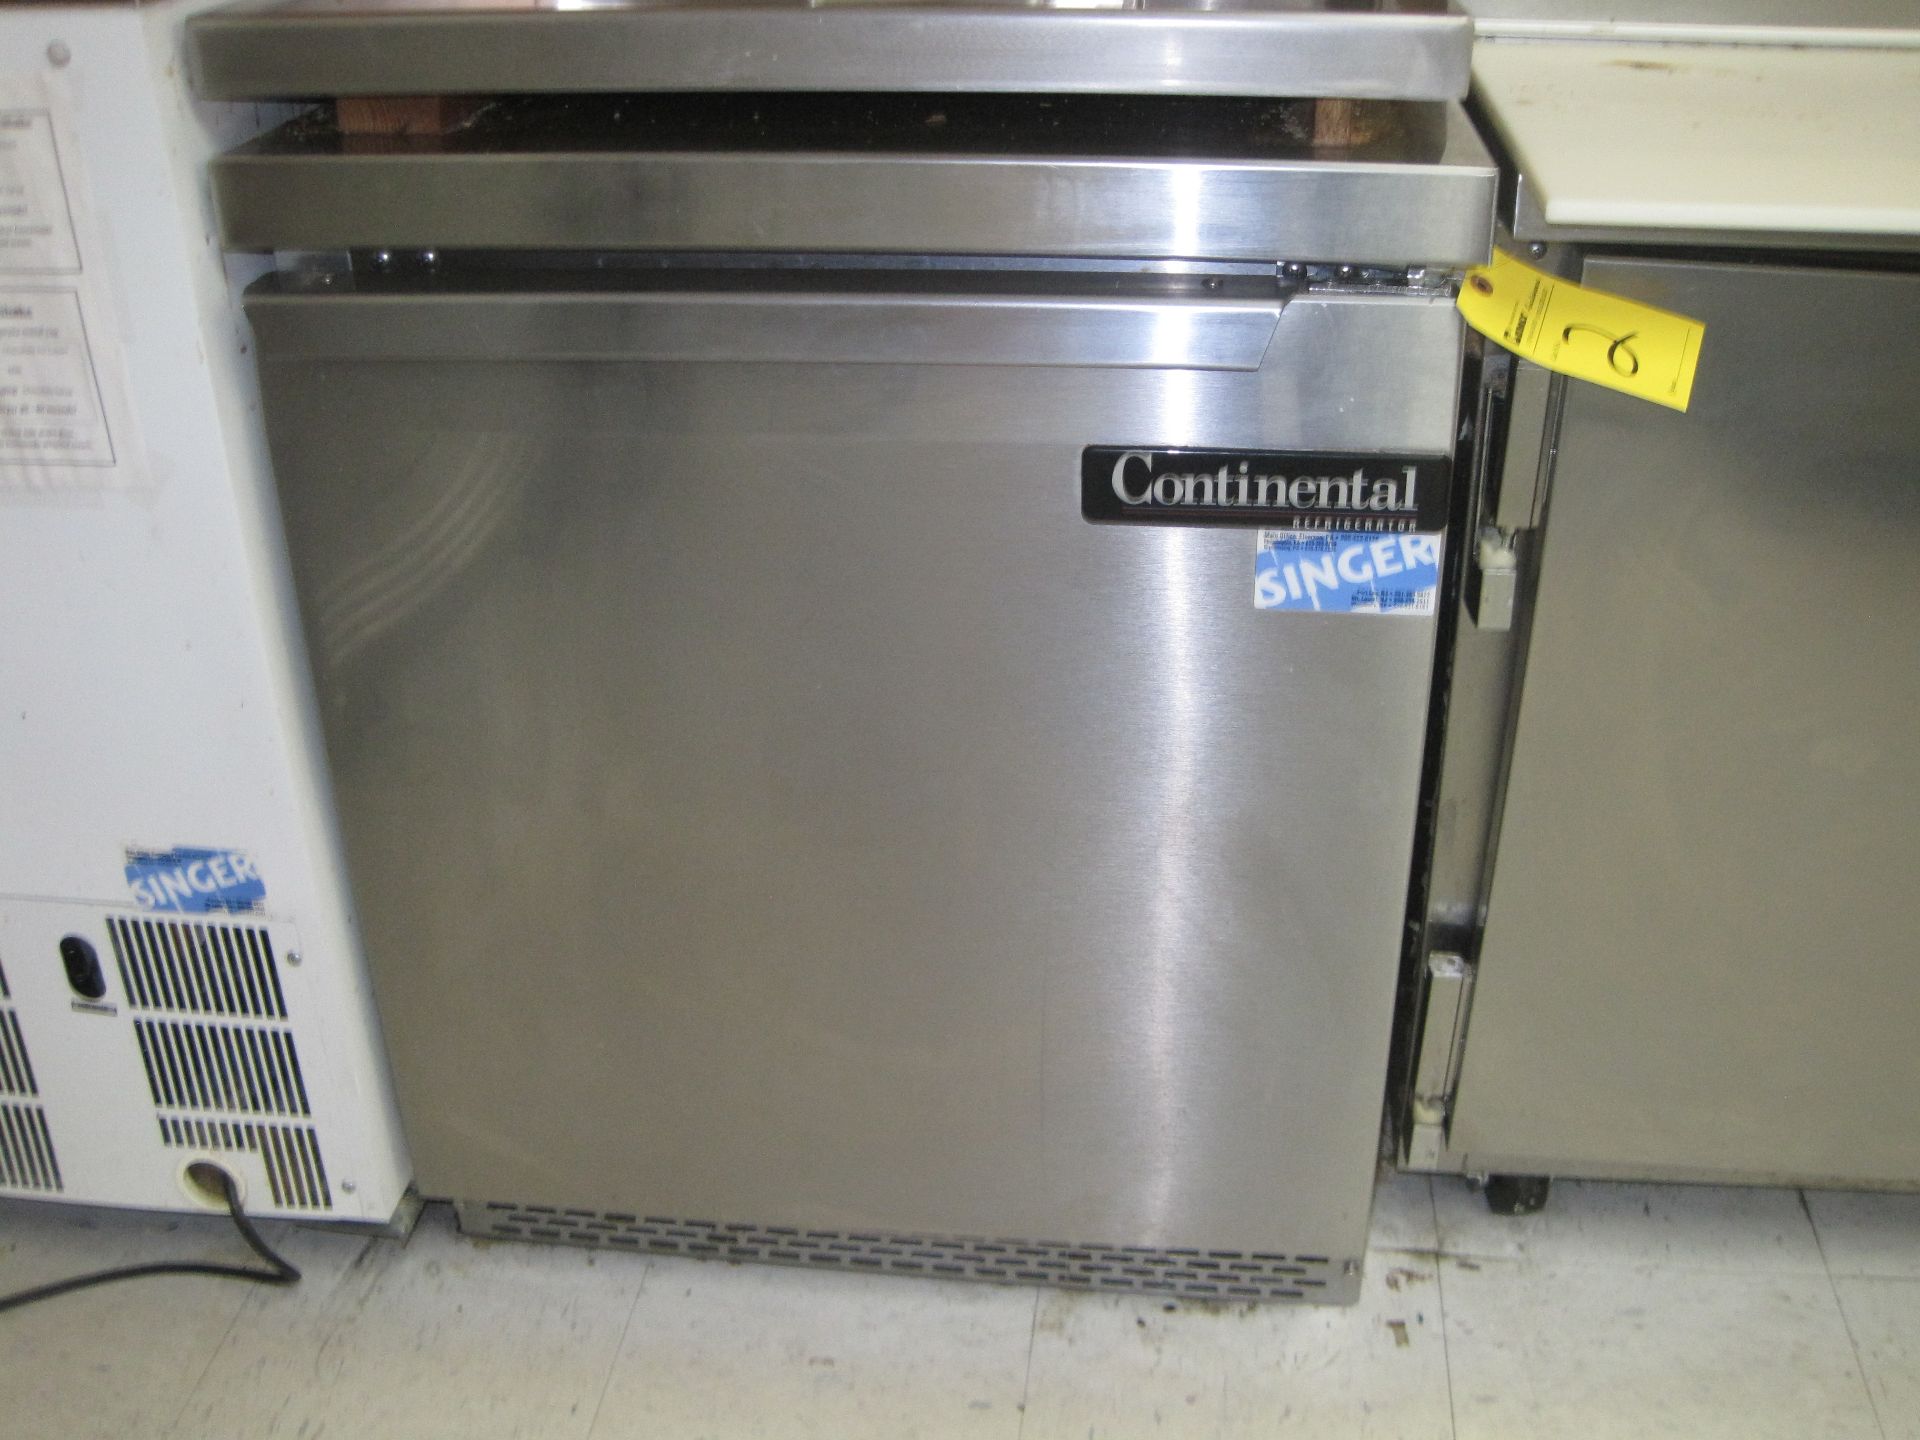 Continental Stainless Steel 27" Under Counter Refrigerator, Single Solid Door, m/n SW27, s/n